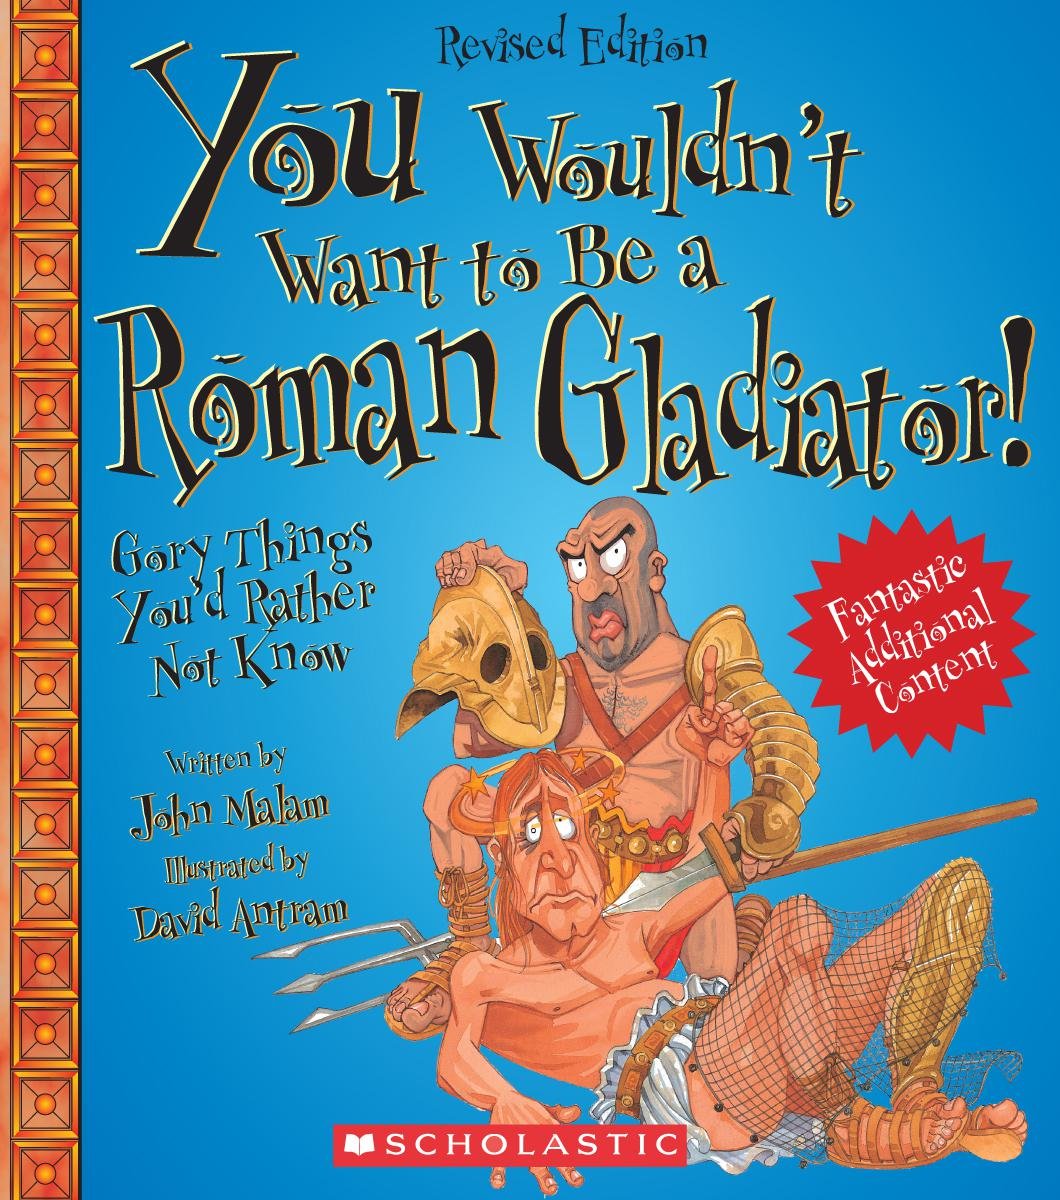 Books You Wouldn't Want to Be a Roman Gladiator.jpg